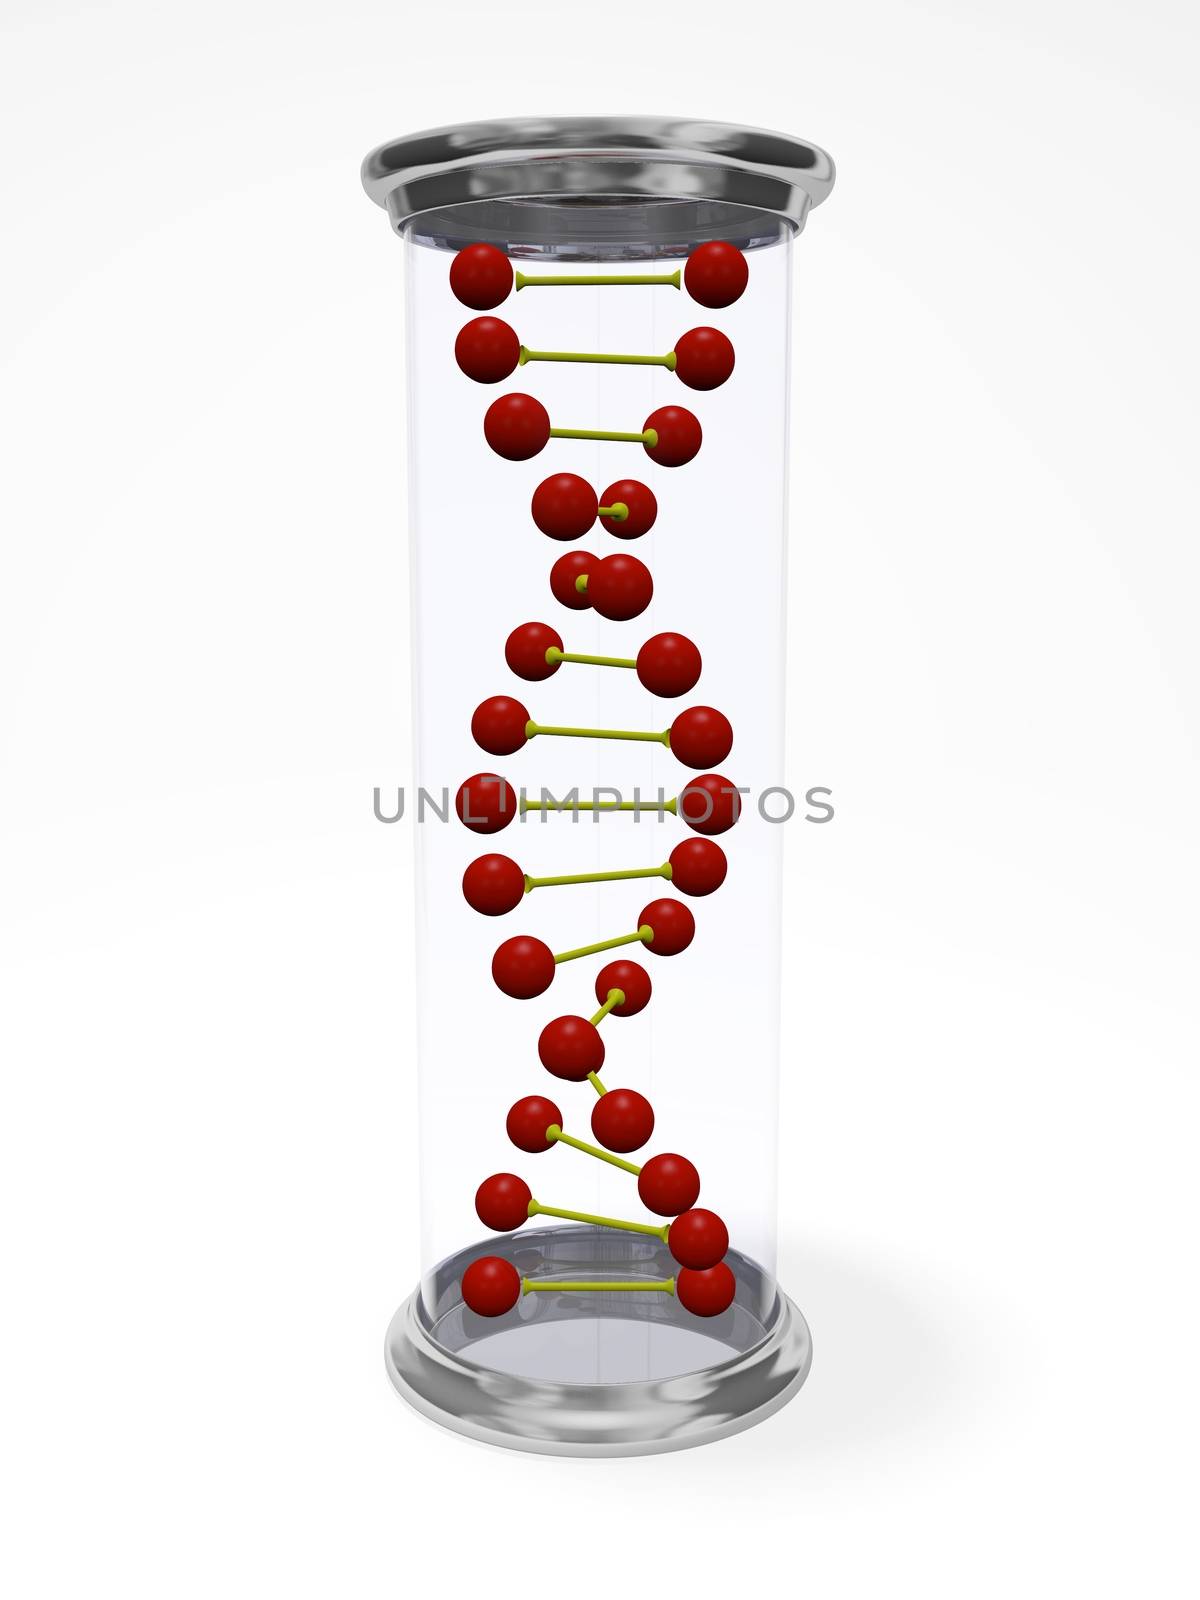 DNA Sealed in Glass Jar by RichieThakur